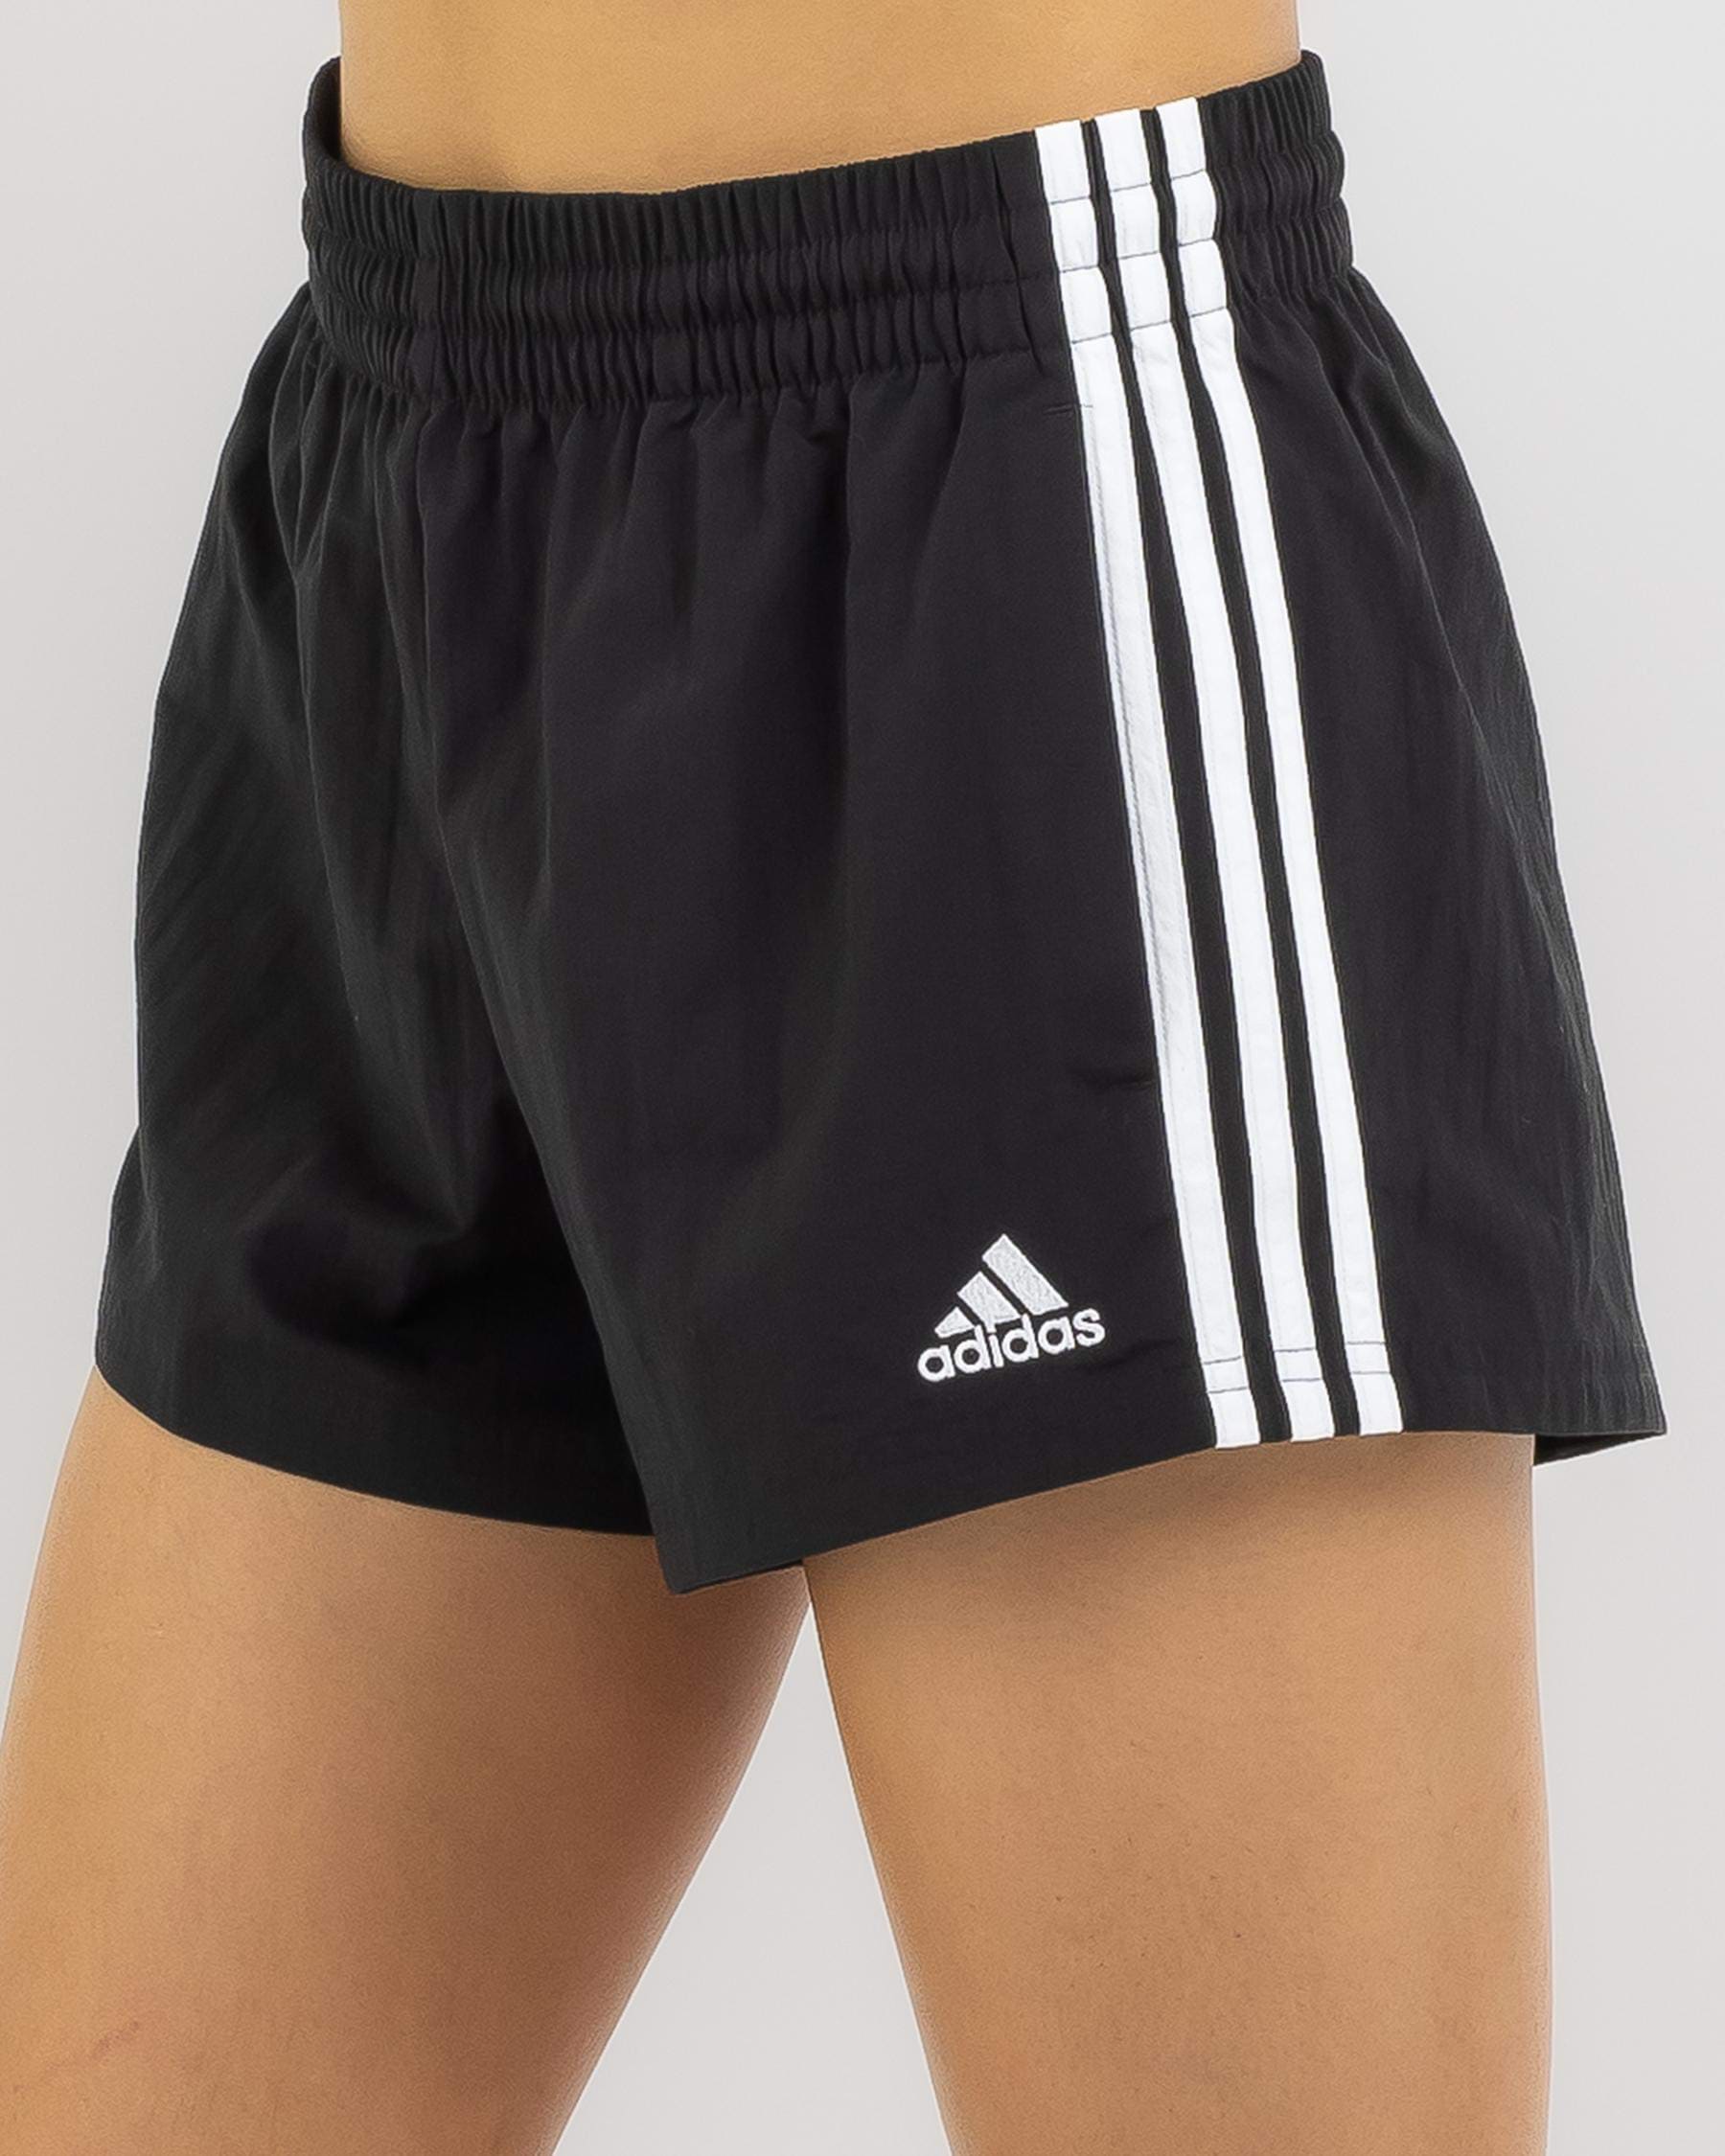 Adidas Essentials - - Black/white Beach 3 Woven Easy Shipping FREE* City States Stripe United Shorts In & Returns